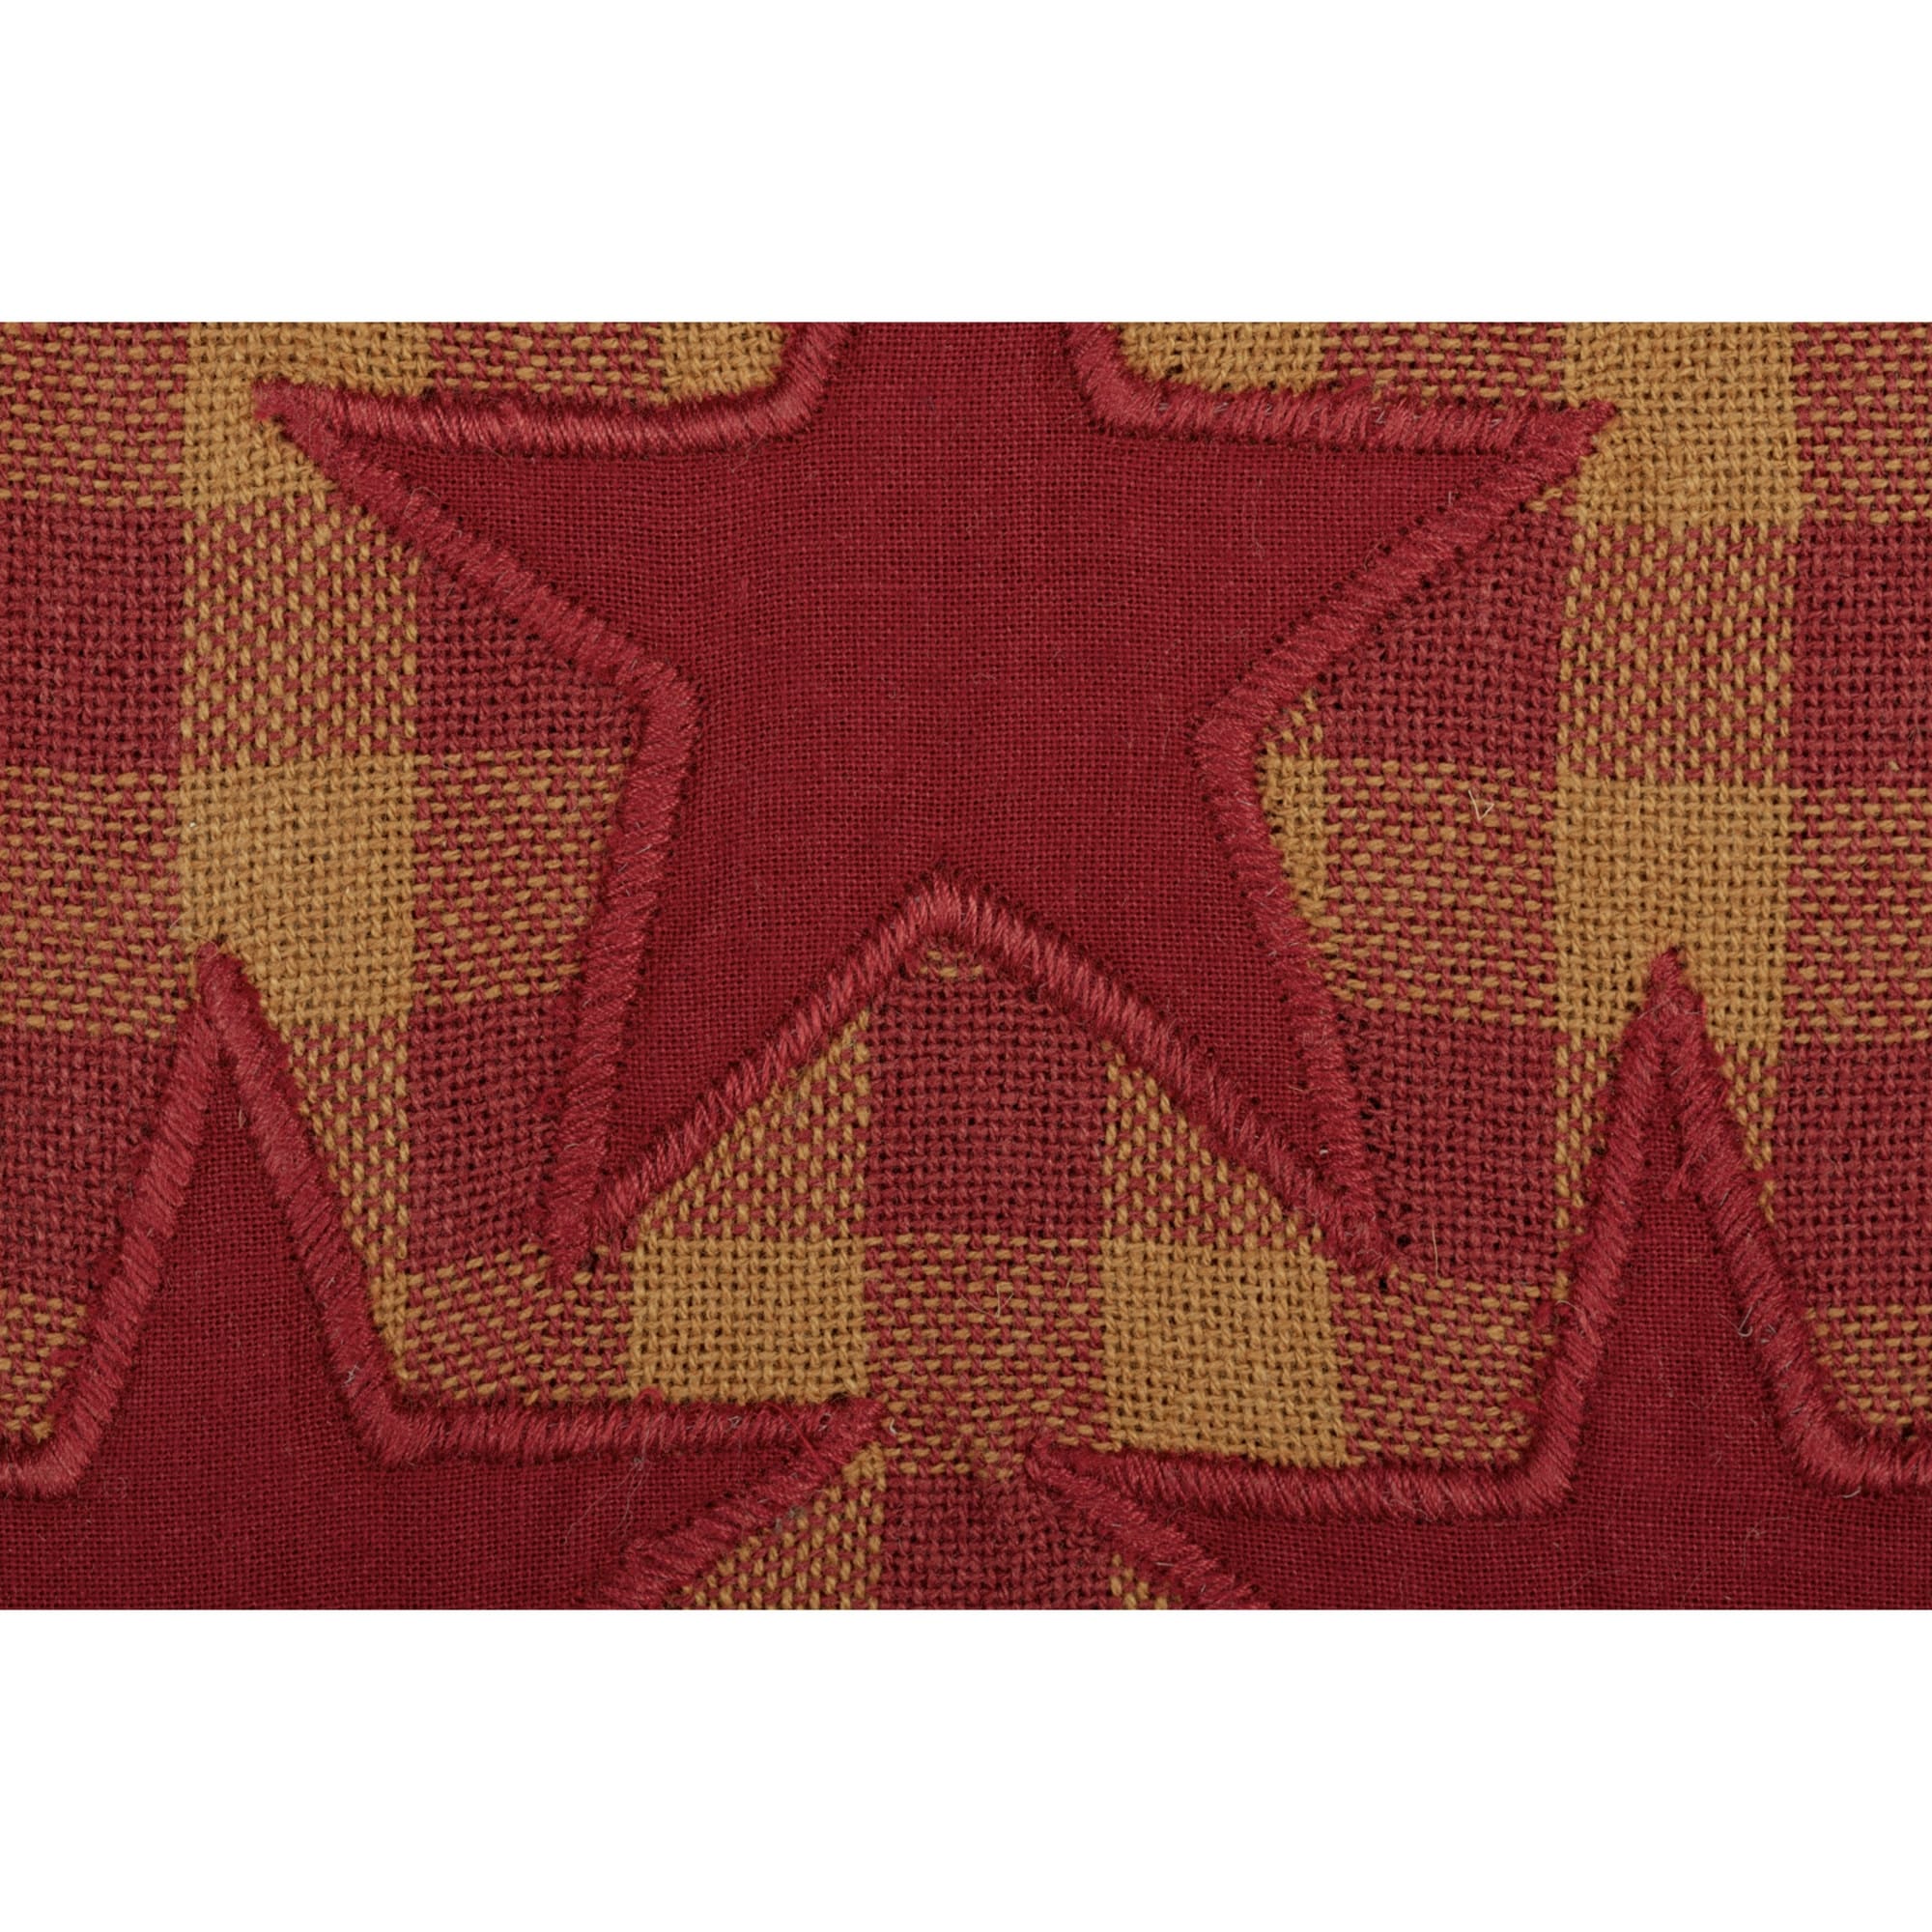 https://ak1.ostkcdn.com/images/products/is/images/direct/fabe91c36626d01976c0704c2a6f801d9f3d54e4/Burgundy-Star-Button-Loop-Kitchen-Towel.jpg